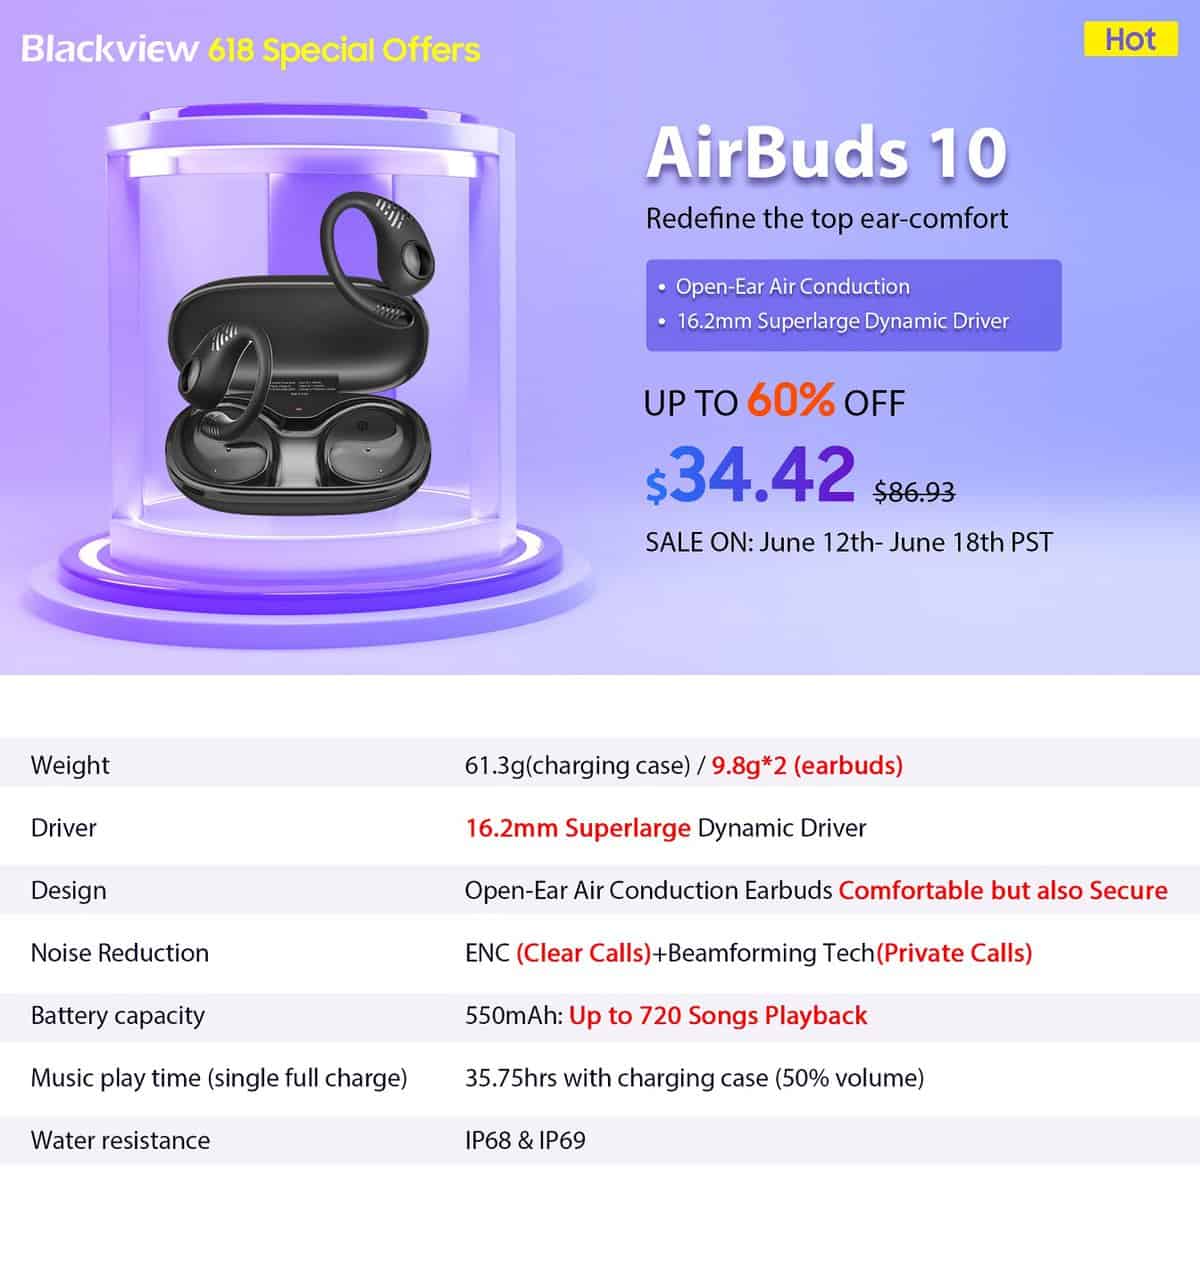 Blackview Airbuds 10 618 Special